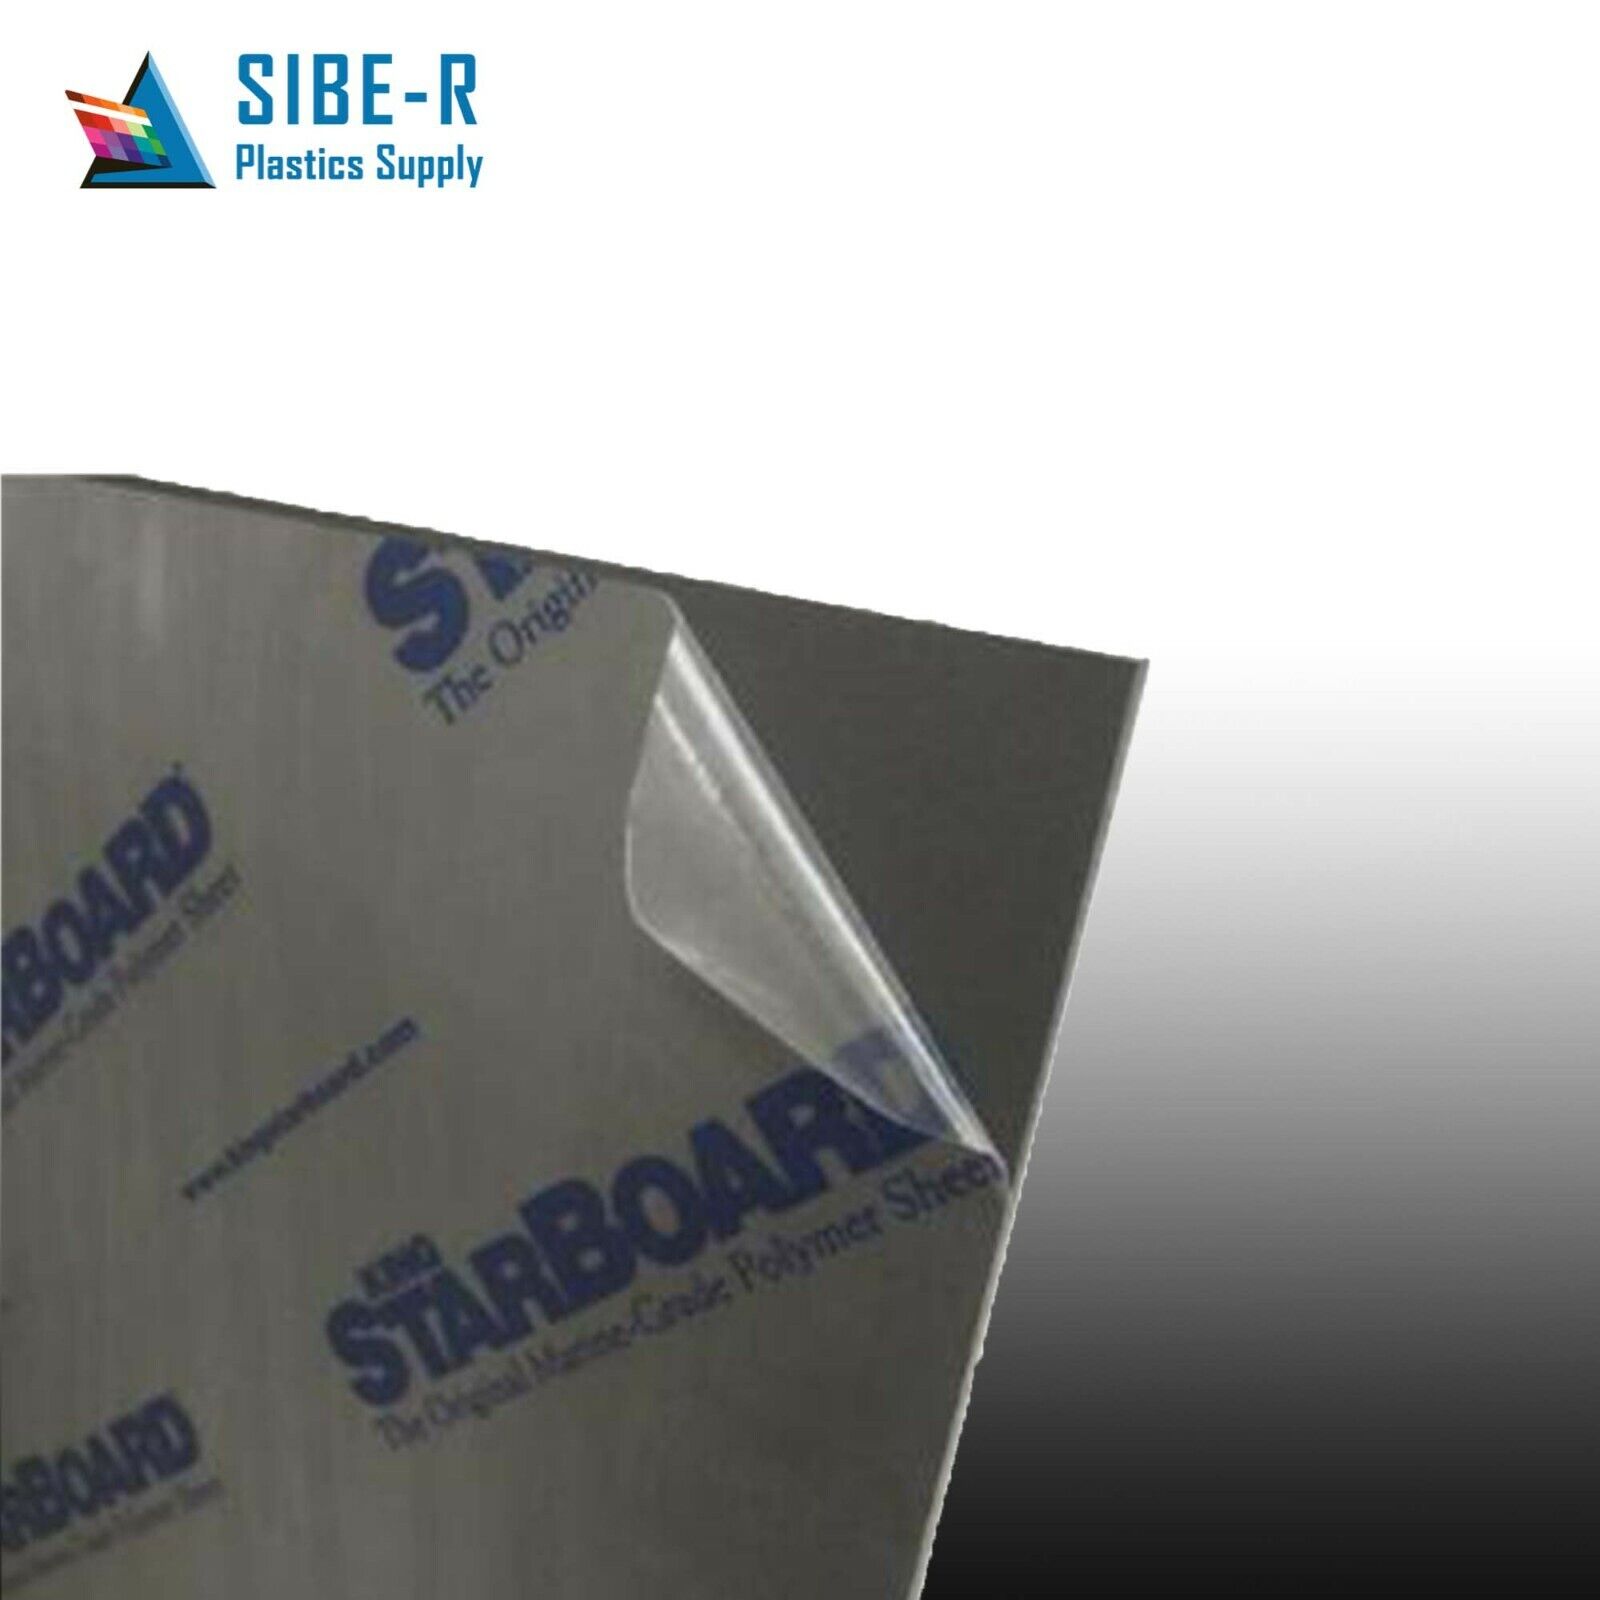 Sibe-R Plastic Supply℠ BLACK OR WHITE KING STARBOARD 1/2" POLYMER HDPE SEA^ SIBE AUTOMATION - фотография #2